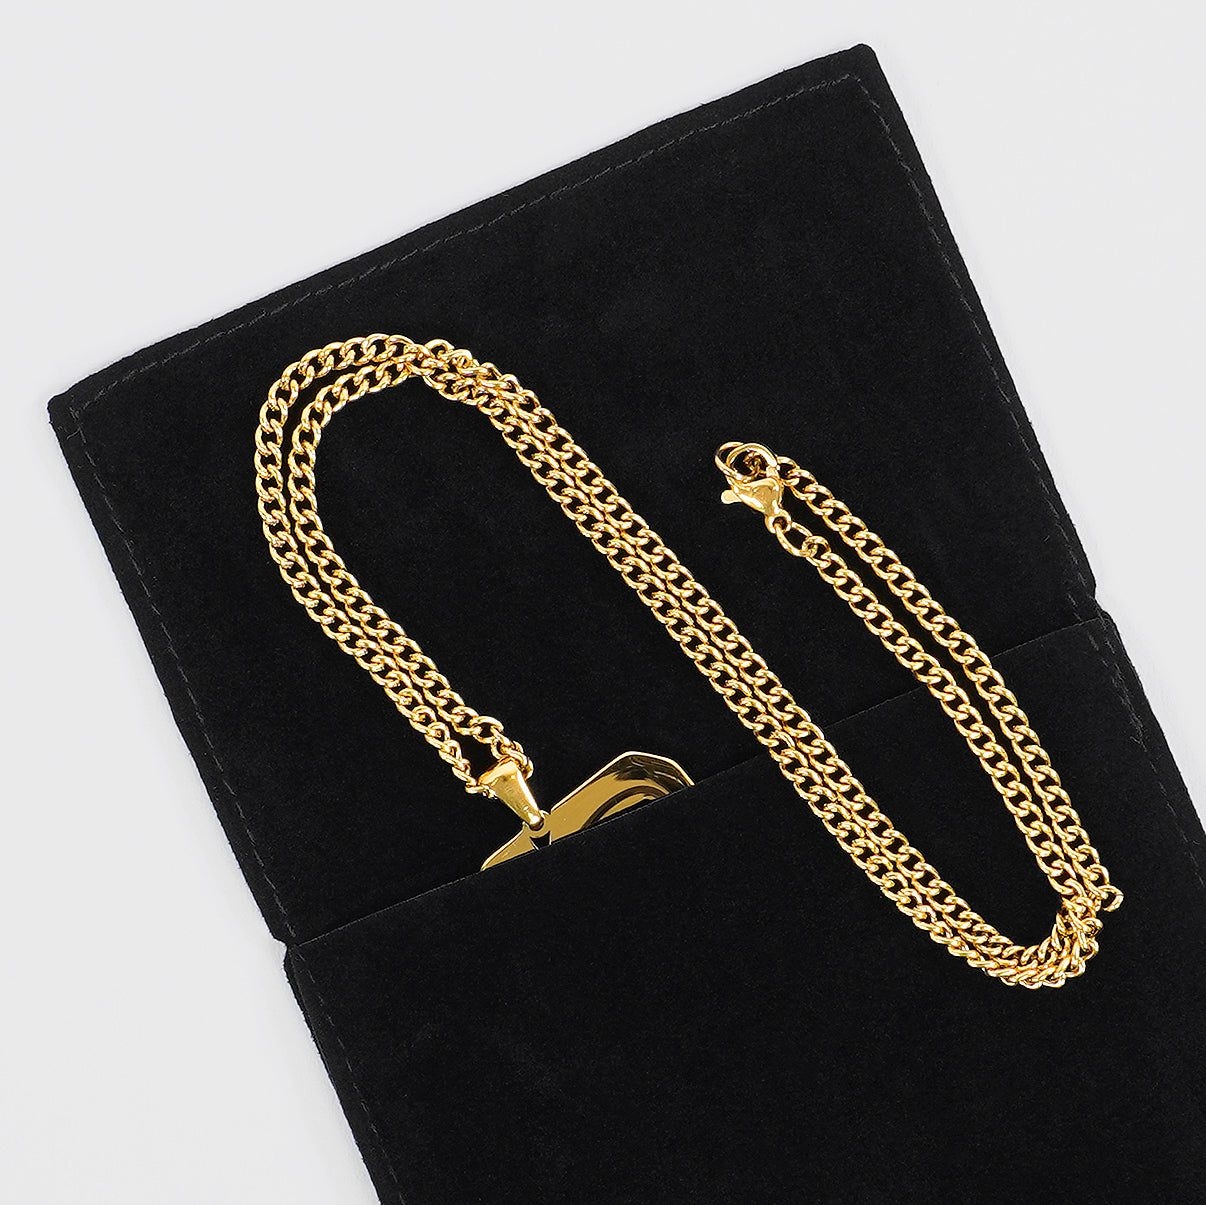 89 Number Pendant with Chain Necklace - Gold Plated Stainless Steel